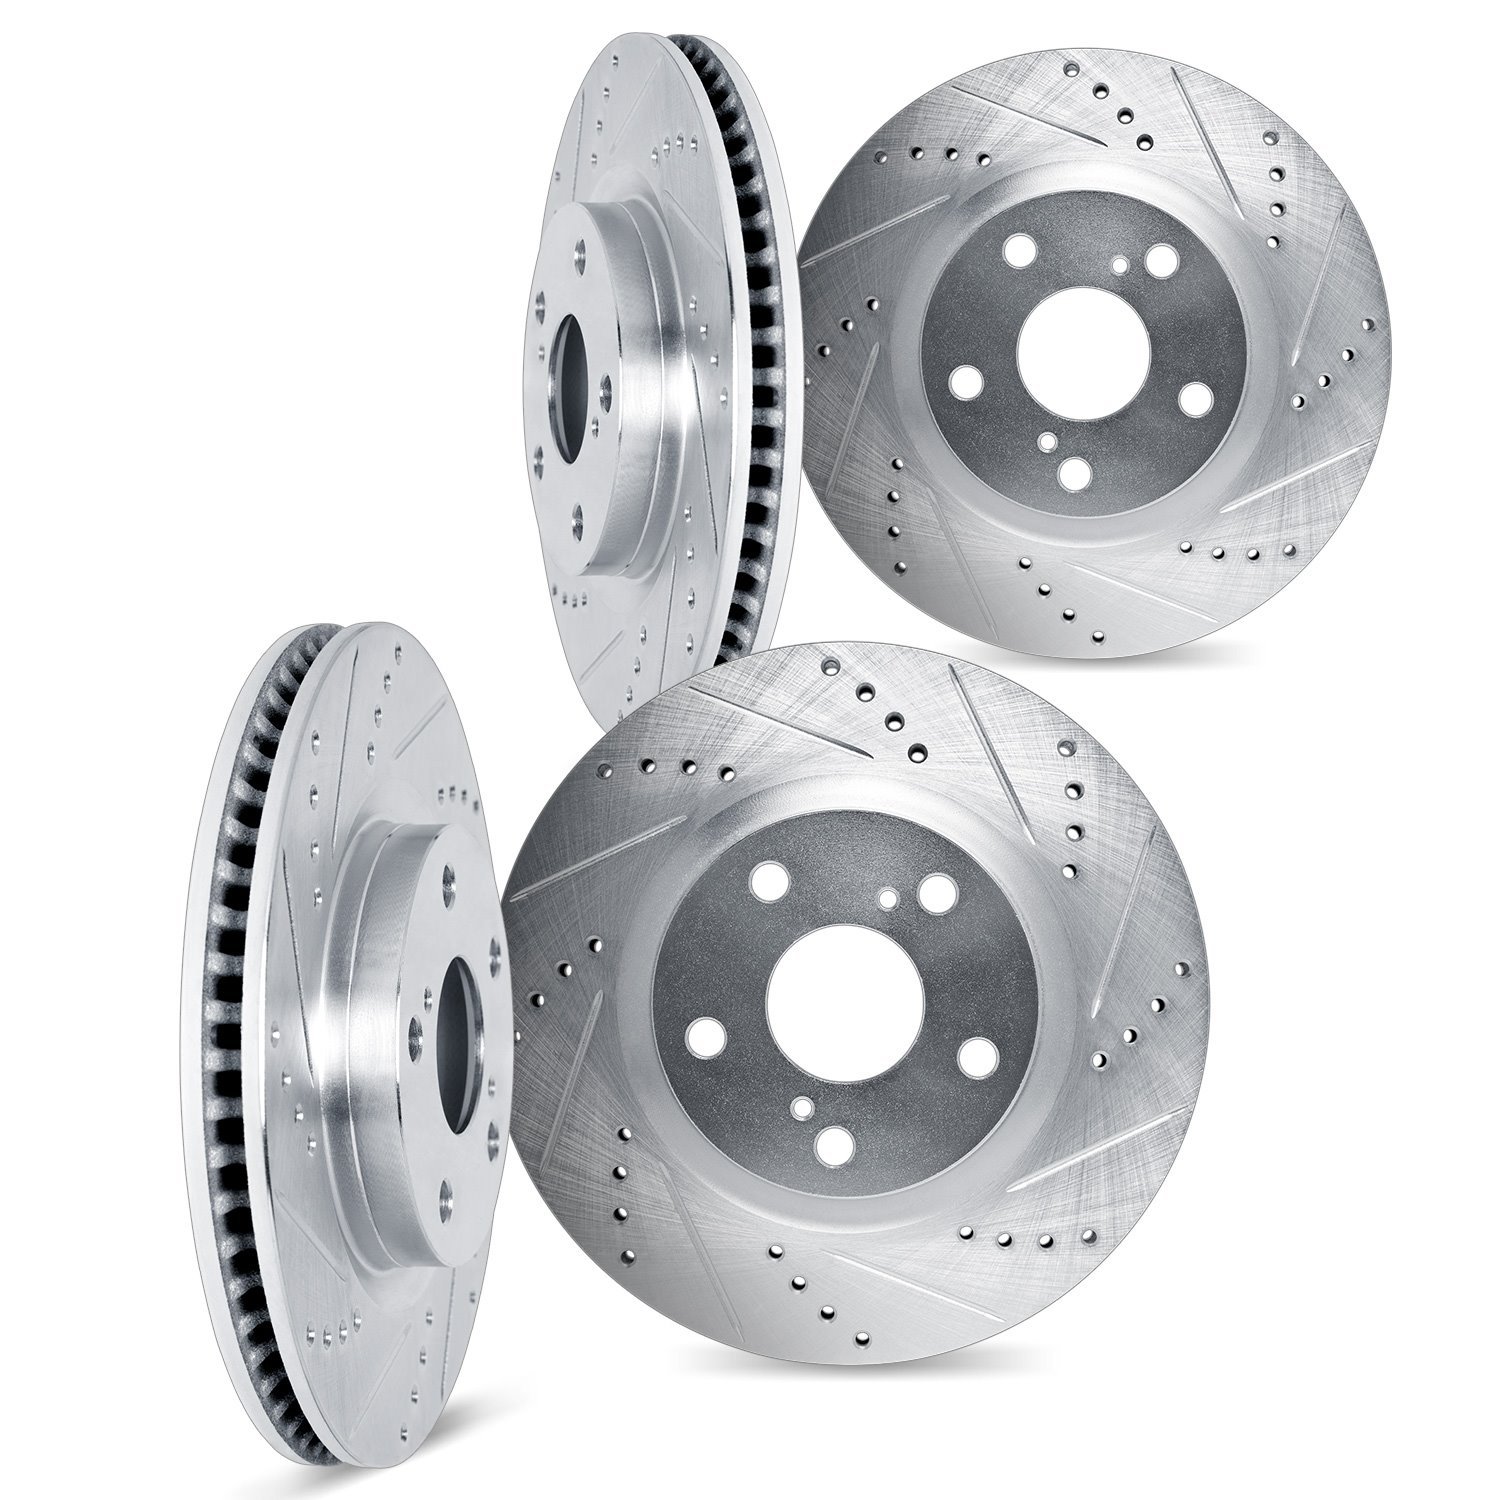 7004-31086 Drilled/Slotted Brake Rotors [Silver], Fits Select Multiple Makes/Models, Position: Front and Rear